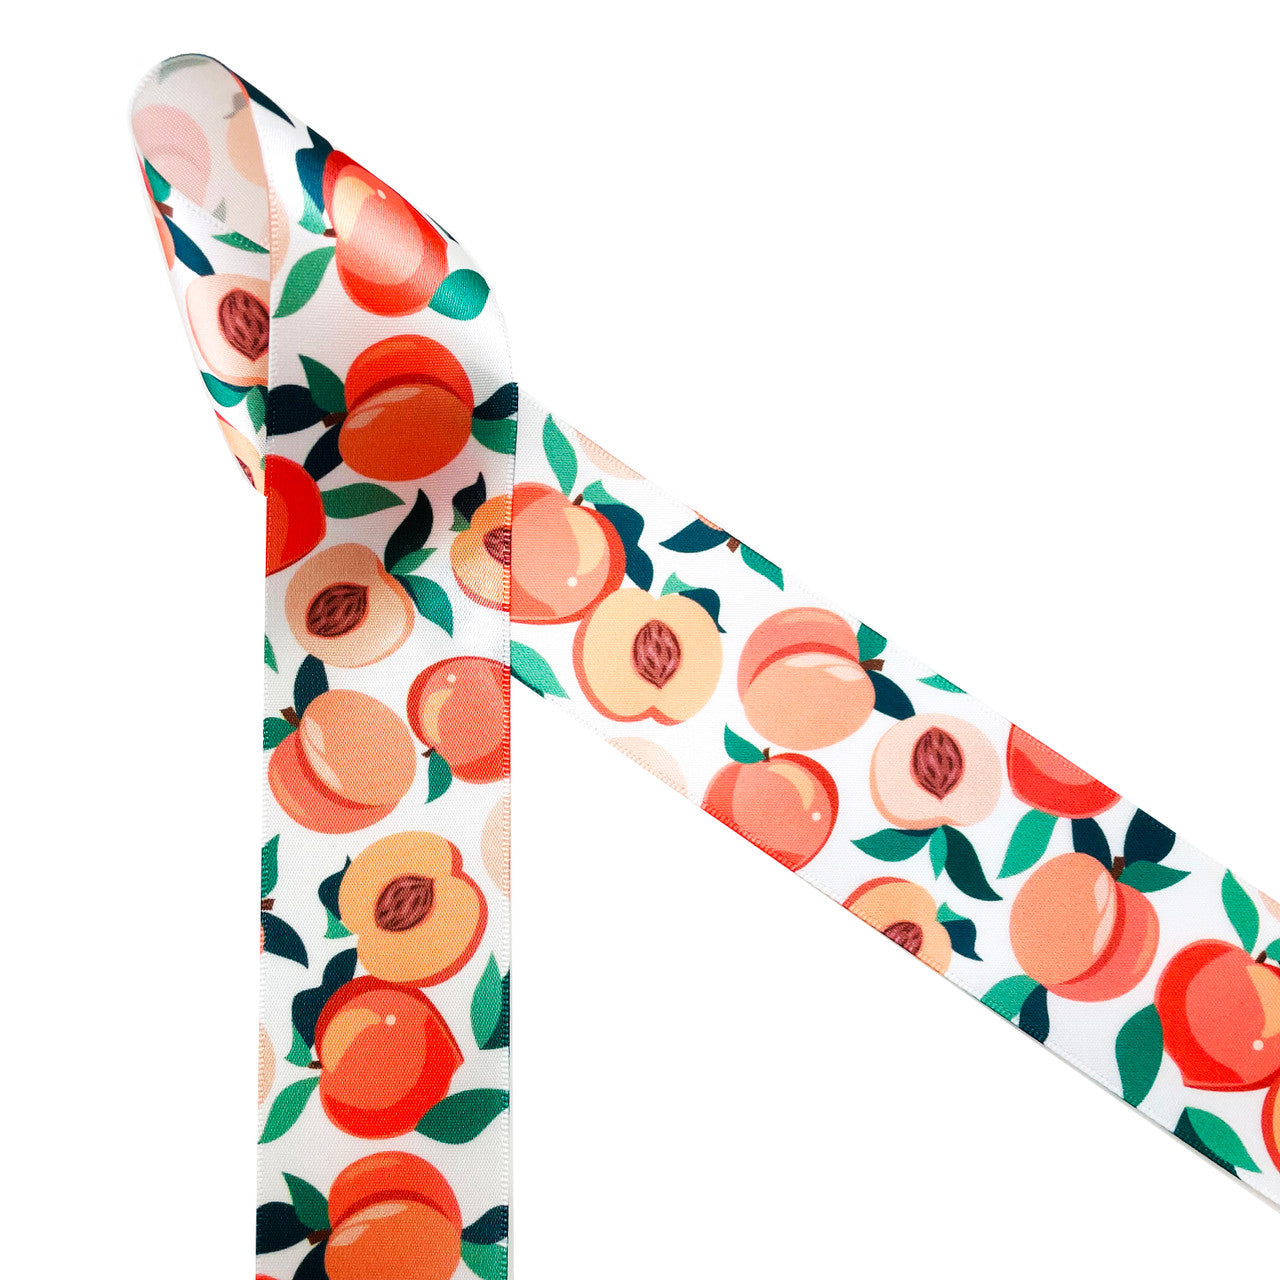 Peaches are the sweetest fruits of Summer! Peaches whole and in halves with green leaves printed on 1.5" white single faces satin ribbon is an ideal ribbon for Summer crafting. This is perfect for baby showers, Summer parties, gift wrap, gift baskets, farm stands, hair bows, wreaths, crafts, sewing and quilting. All our ribbon is designed an printed in the USA